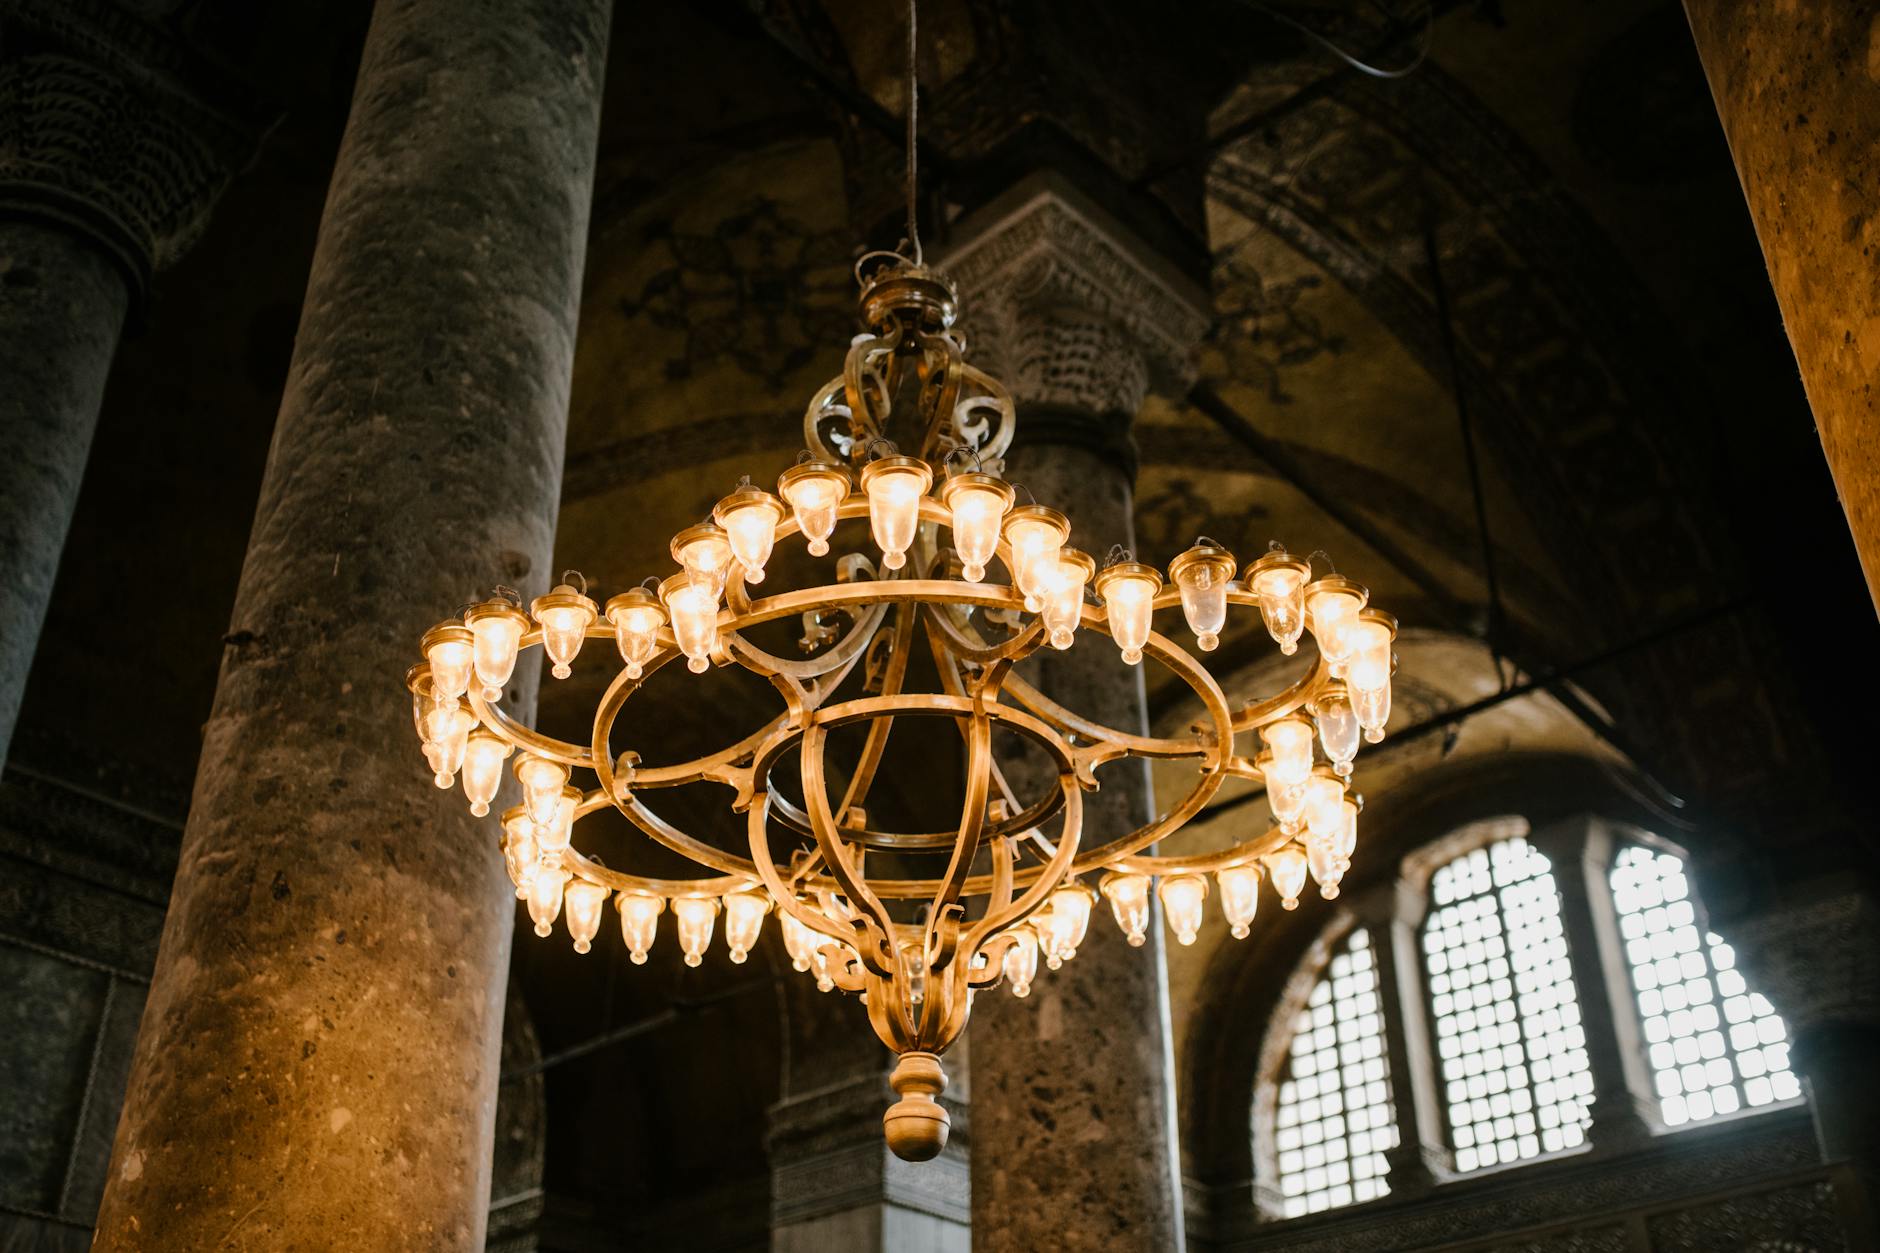 Low angle of old lighting up chandelier hanging from dome with pillars in eastern ancient religious cathedral